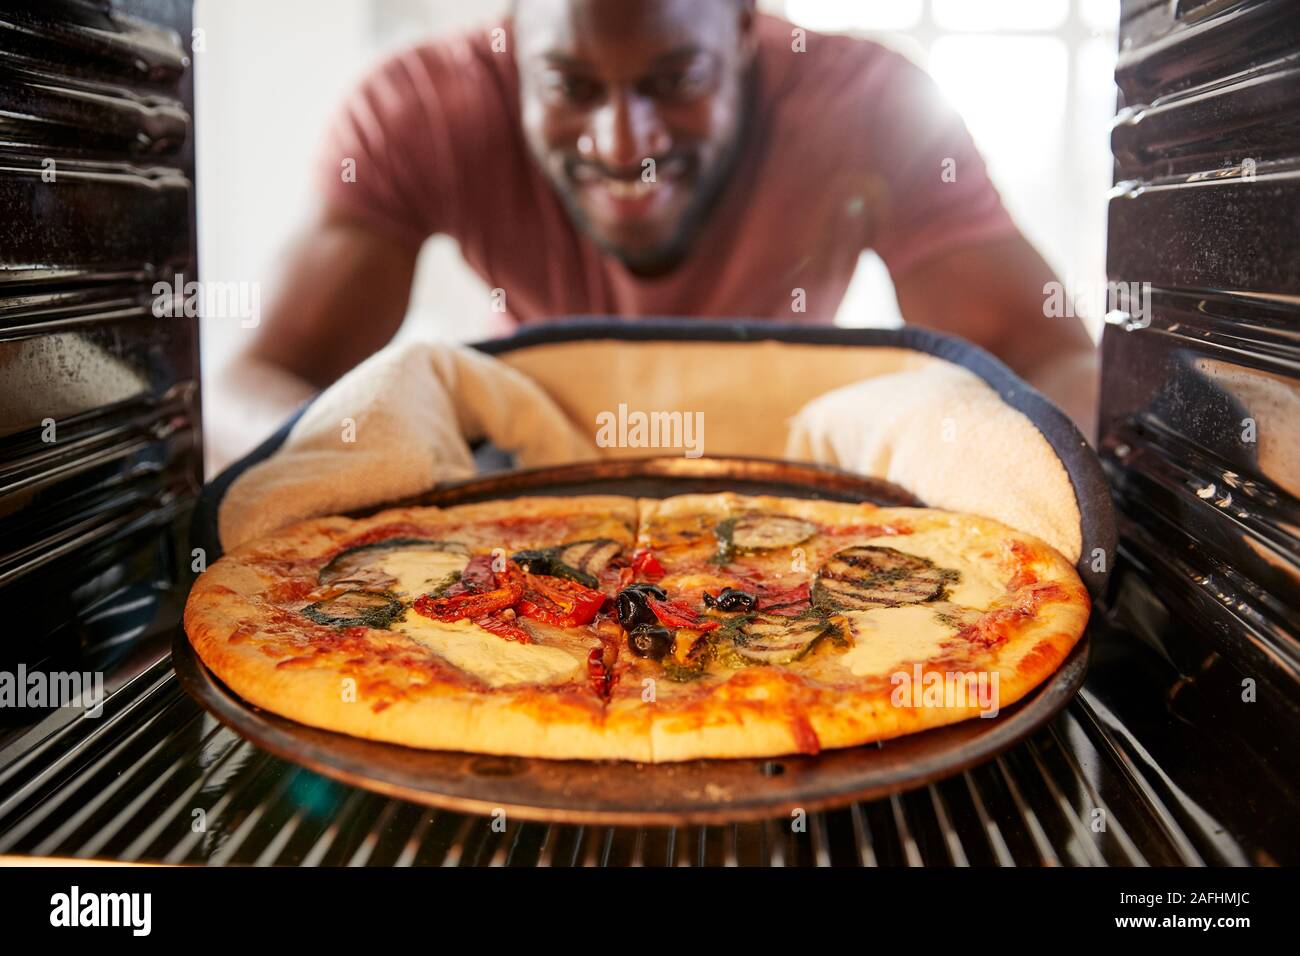 View Looking Out From Inside Oven As Man Cooks Fresh Pizza Stock Photo